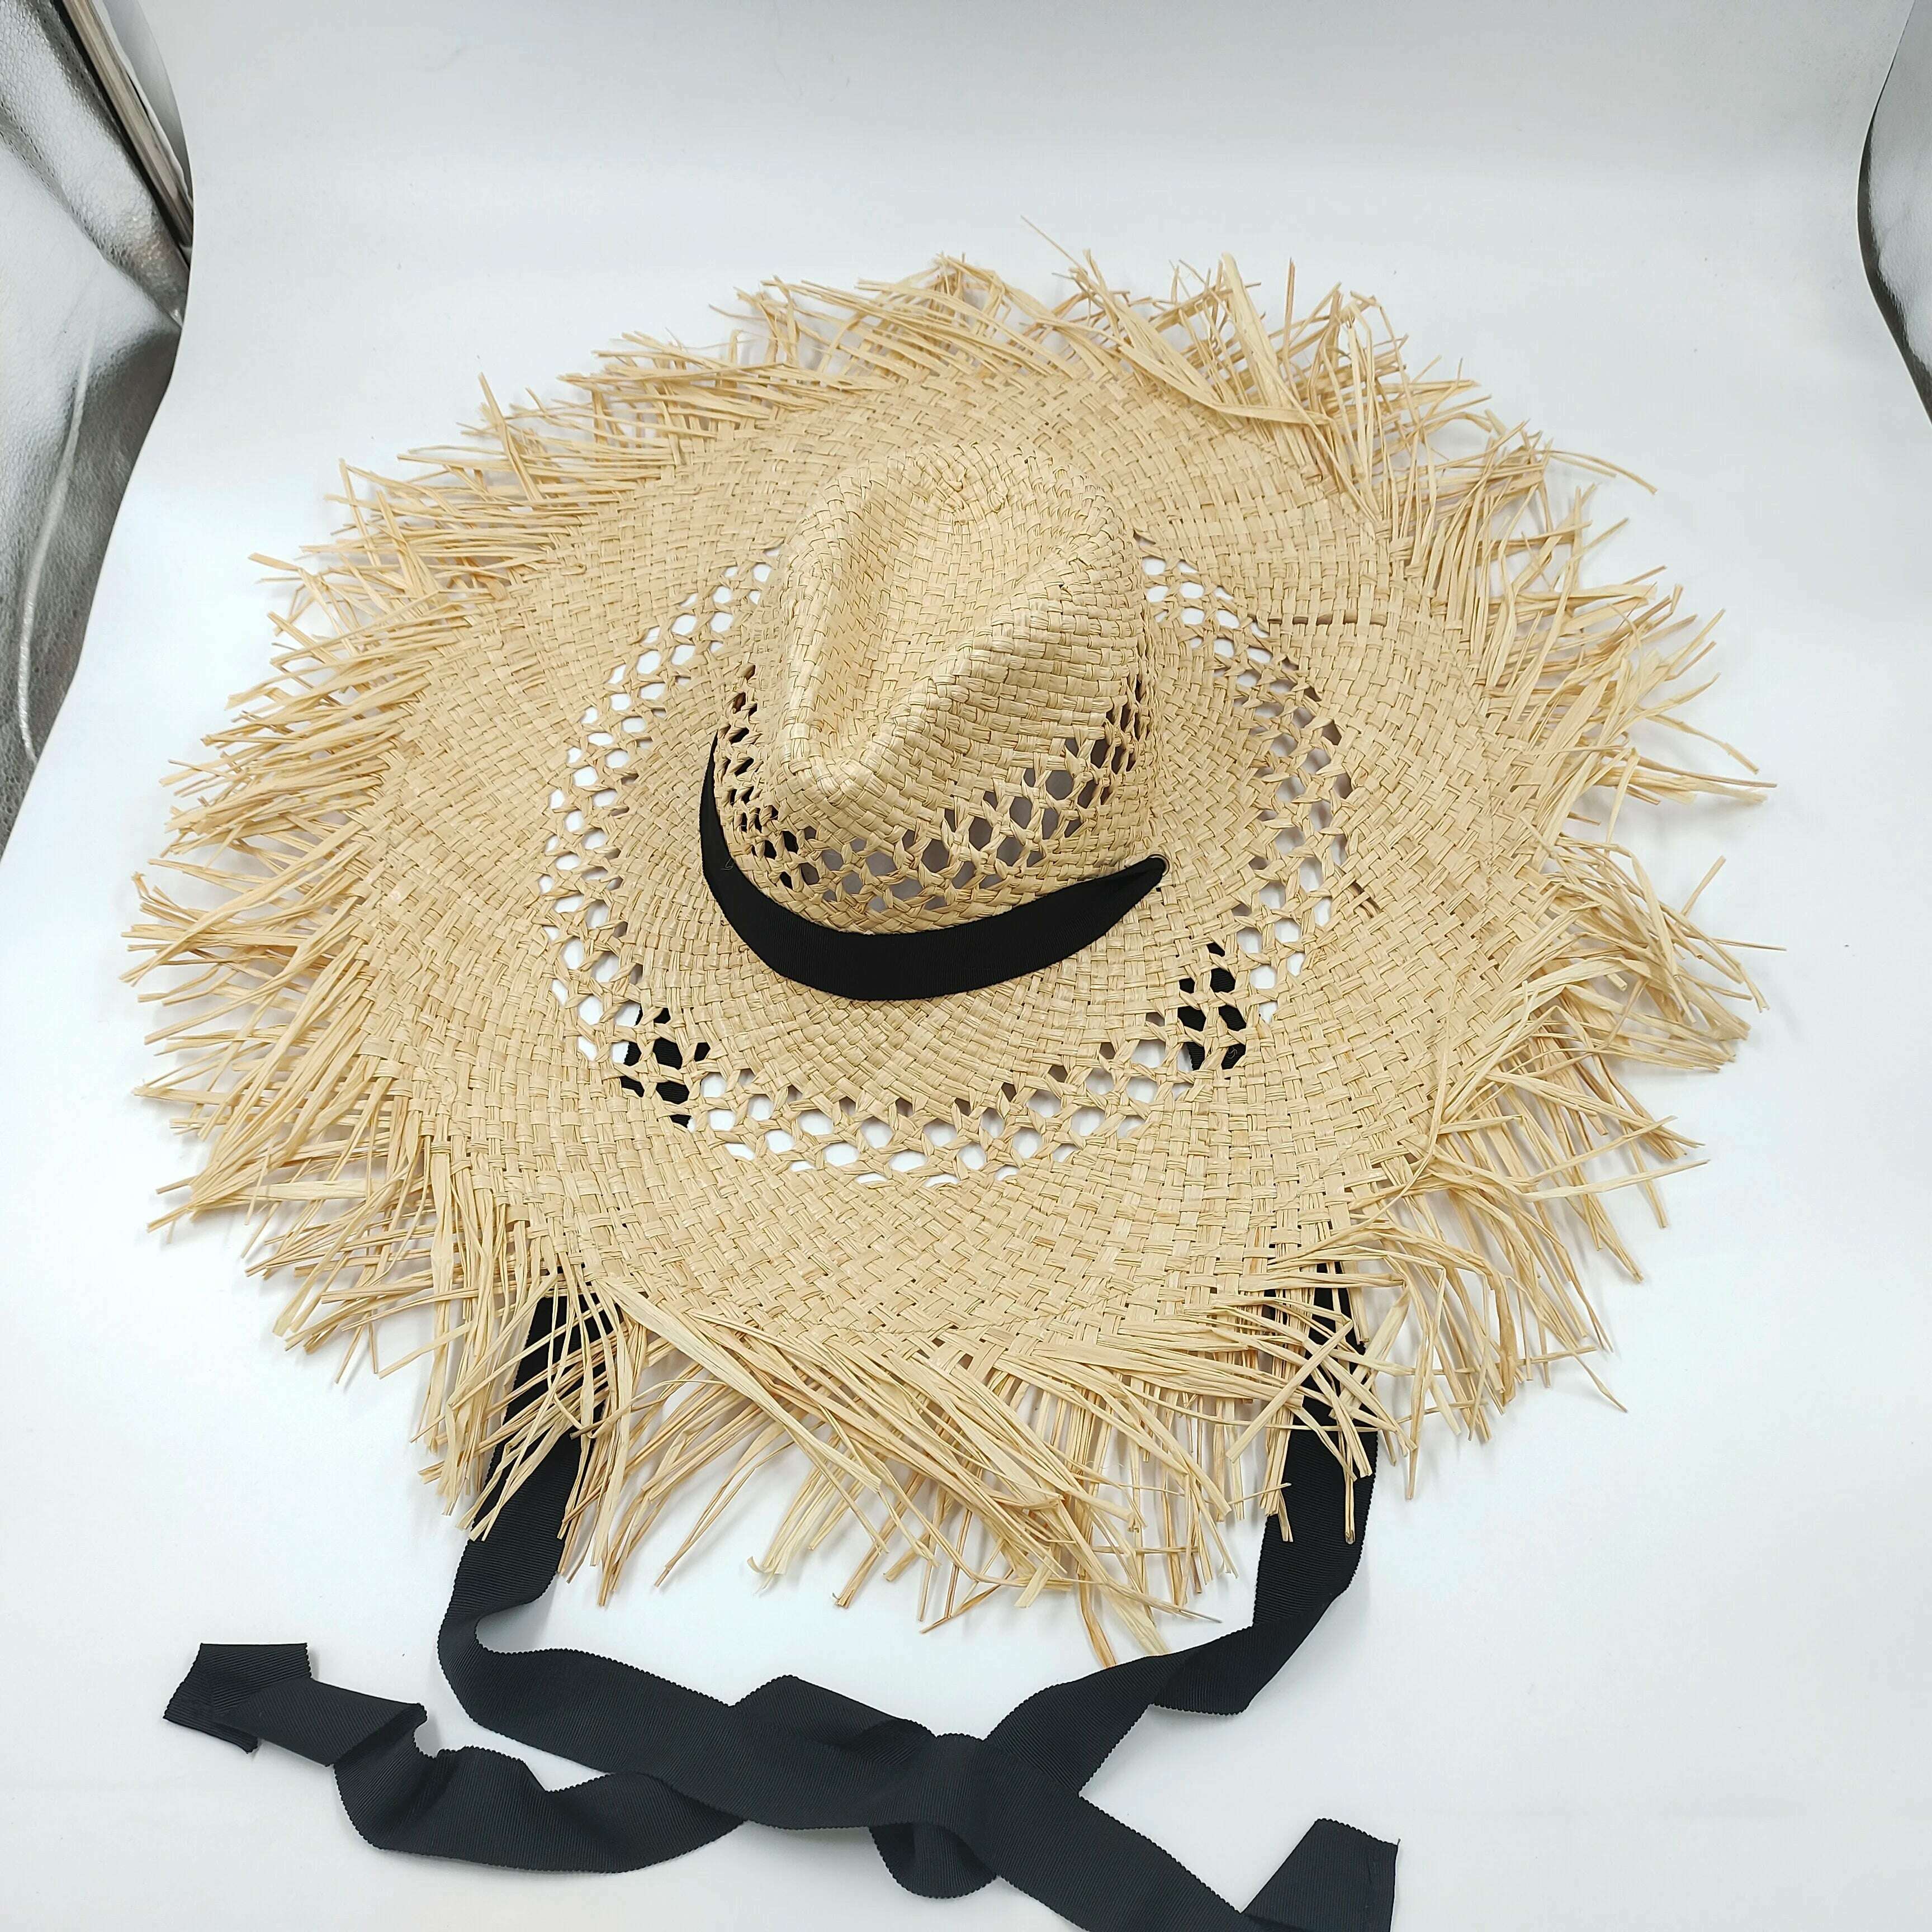 KIMLUD, women straw hat  Flat Top Straw Hat Vacation Casual Shopping Beach Hats for Woman Hats for girls Church Courtesy Panama Sun Hat, 15 / M 56-58CM, KIMLUD Womens Clothes